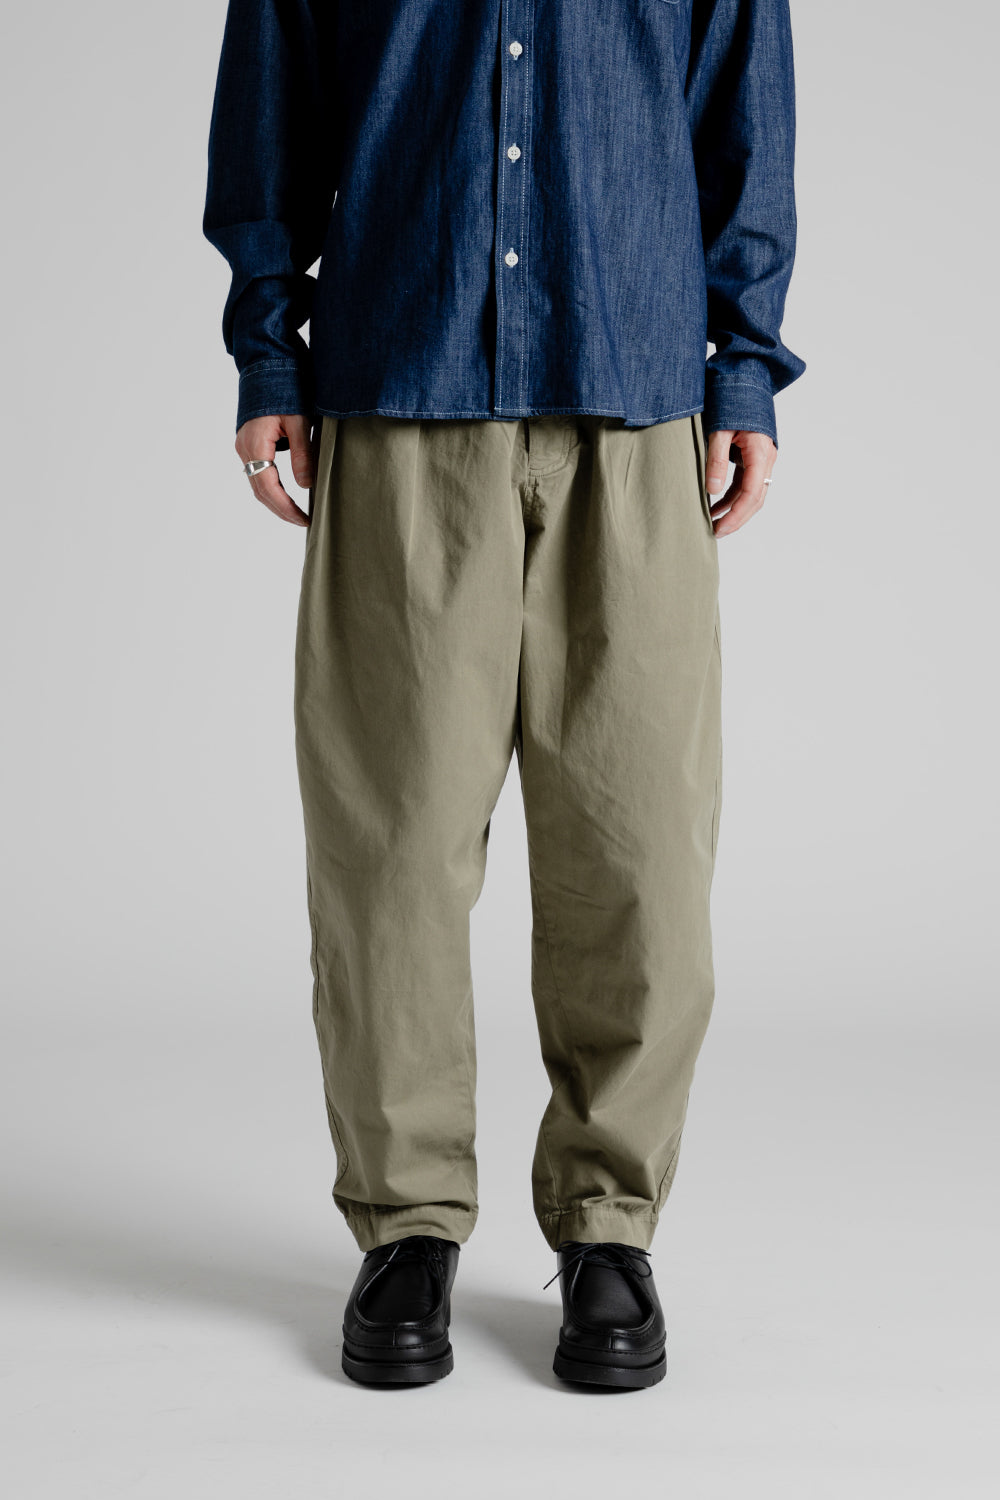 Kestin Clyde Pant in Sage.